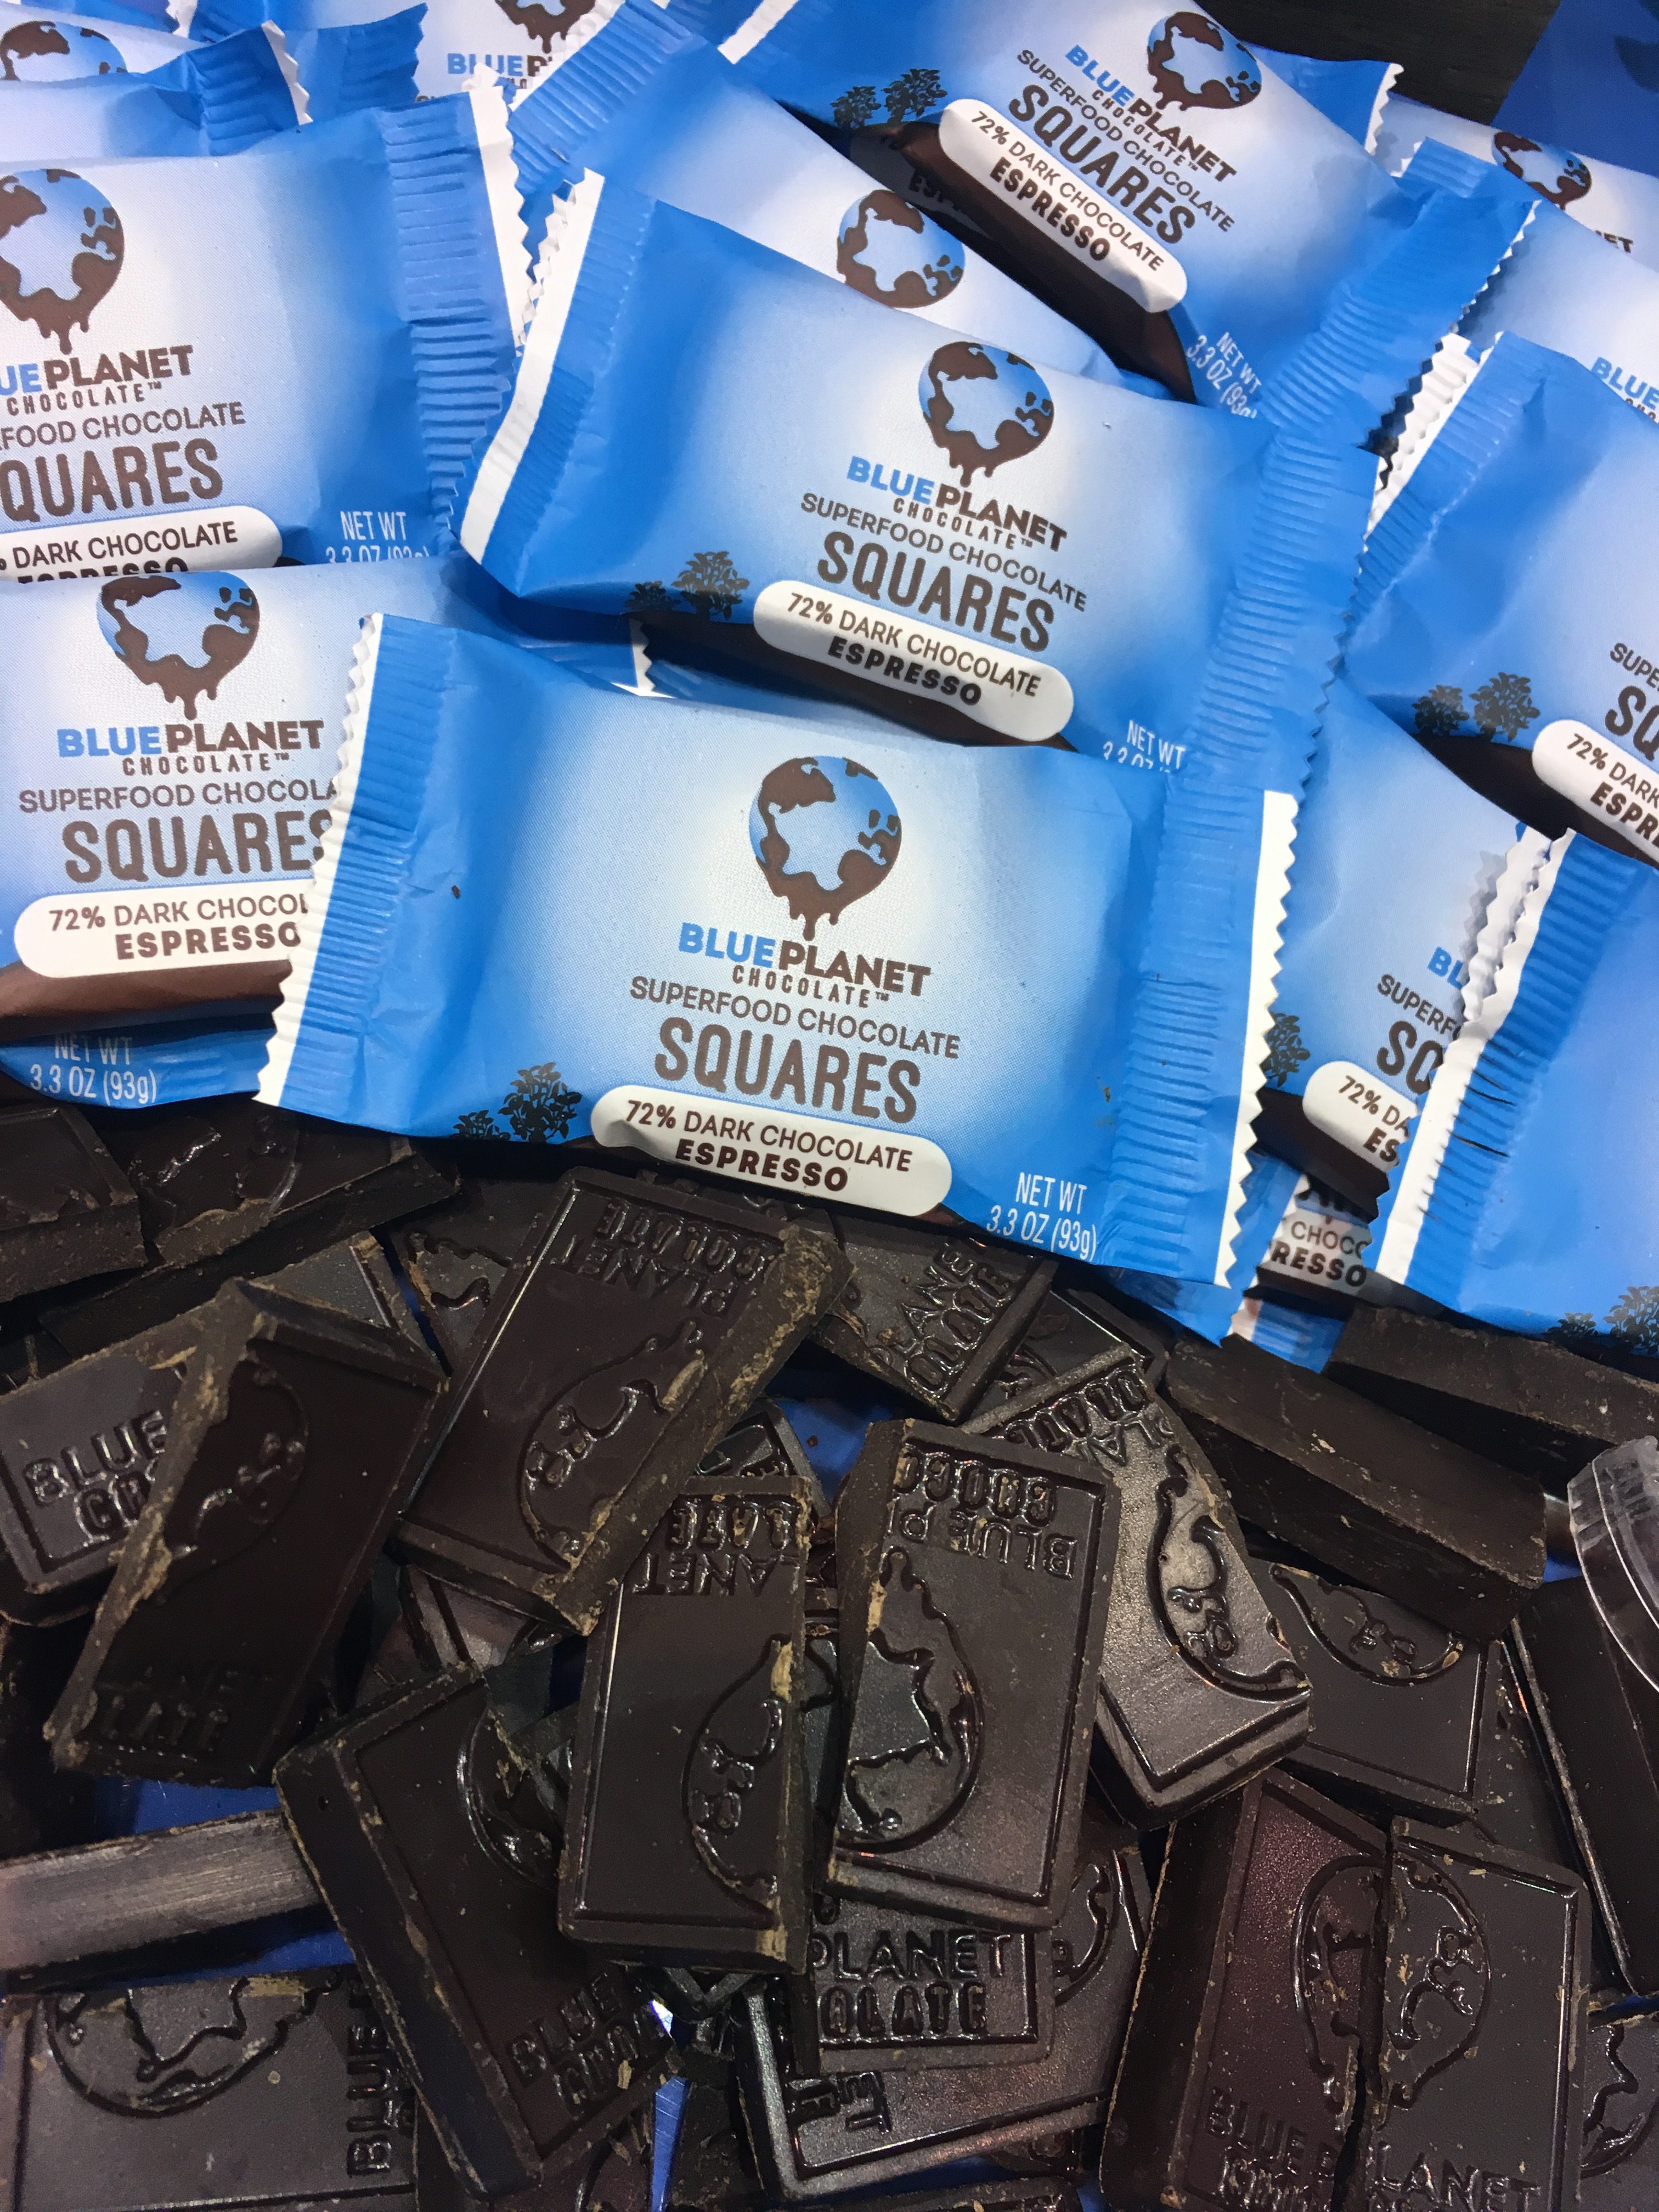 Blue Planet Superfood Chocolate Squares